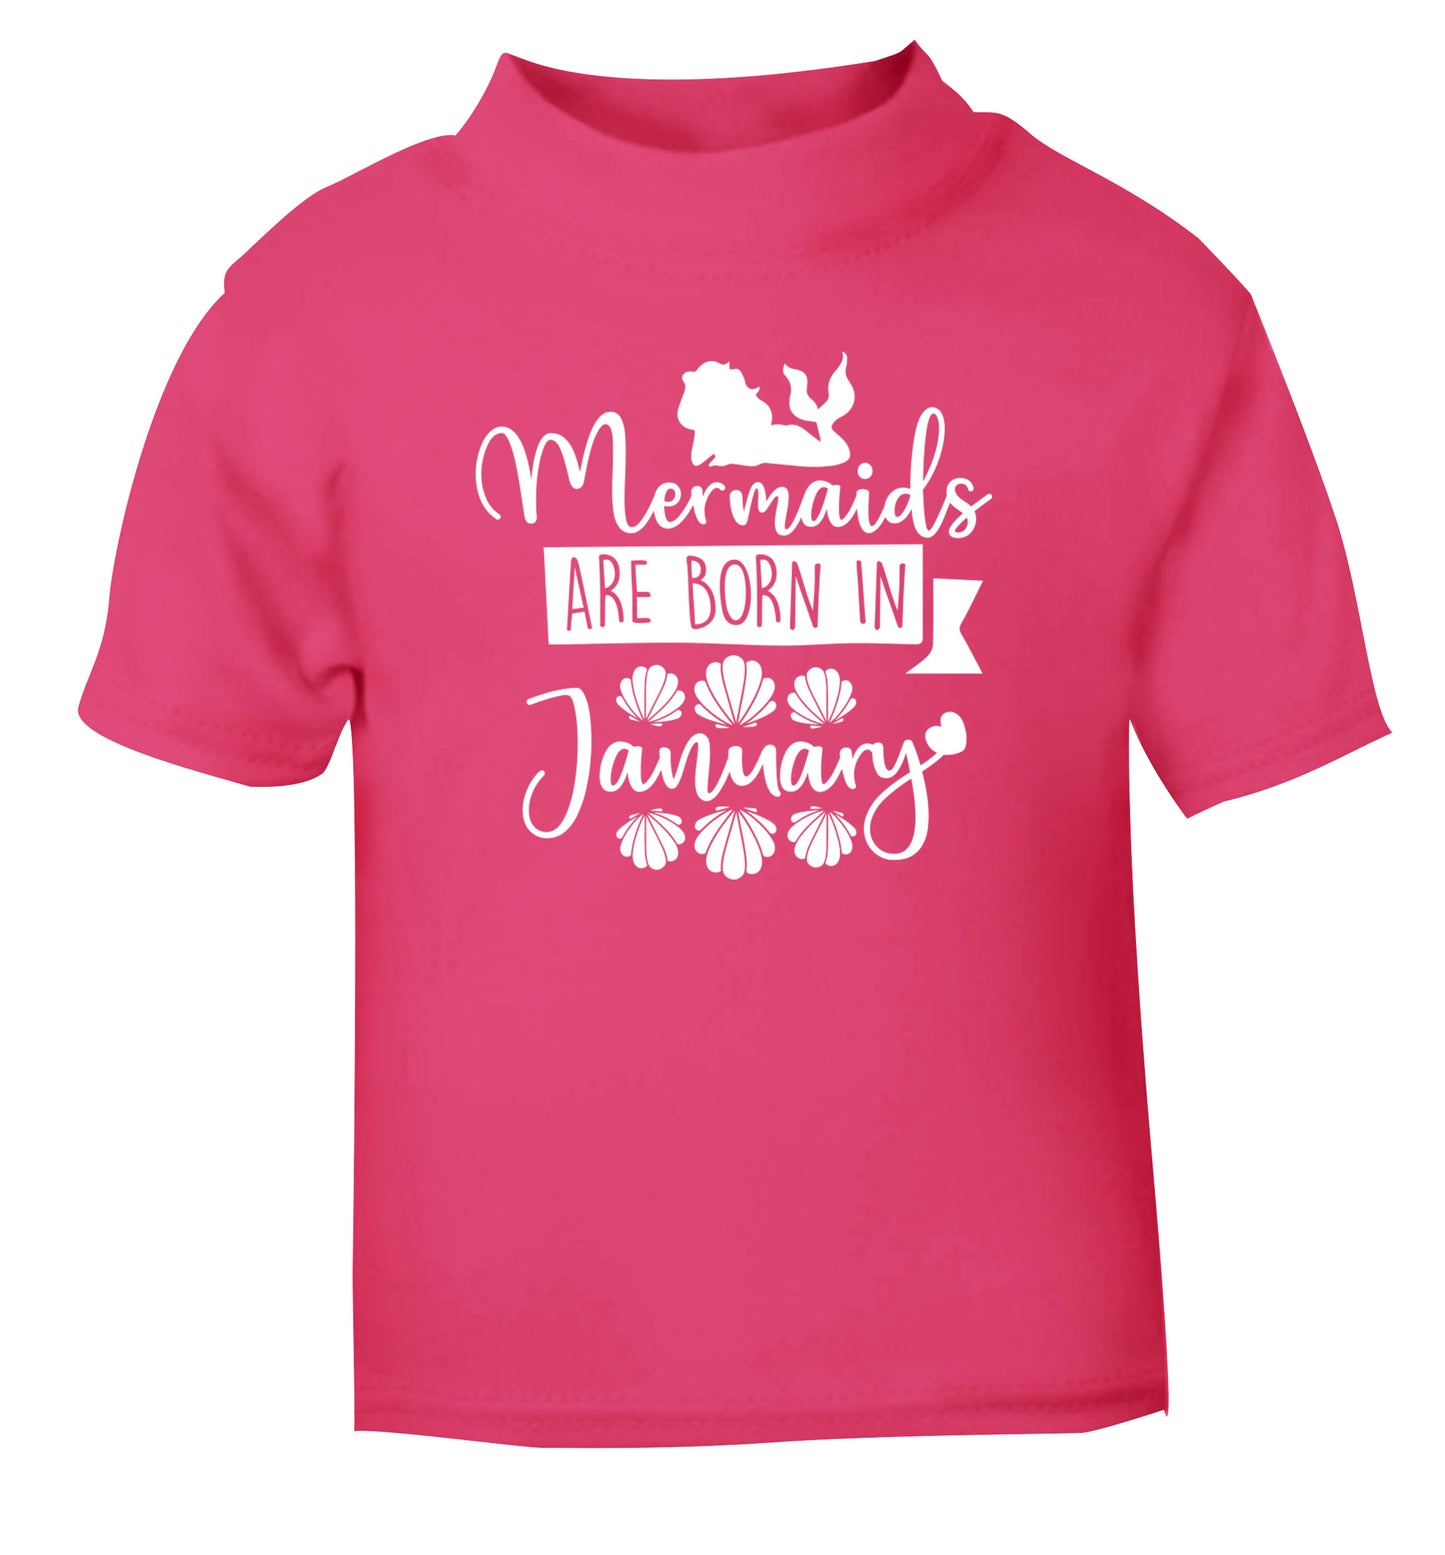 Mermaids are born in January pink Baby Toddler Tshirt 2 Years